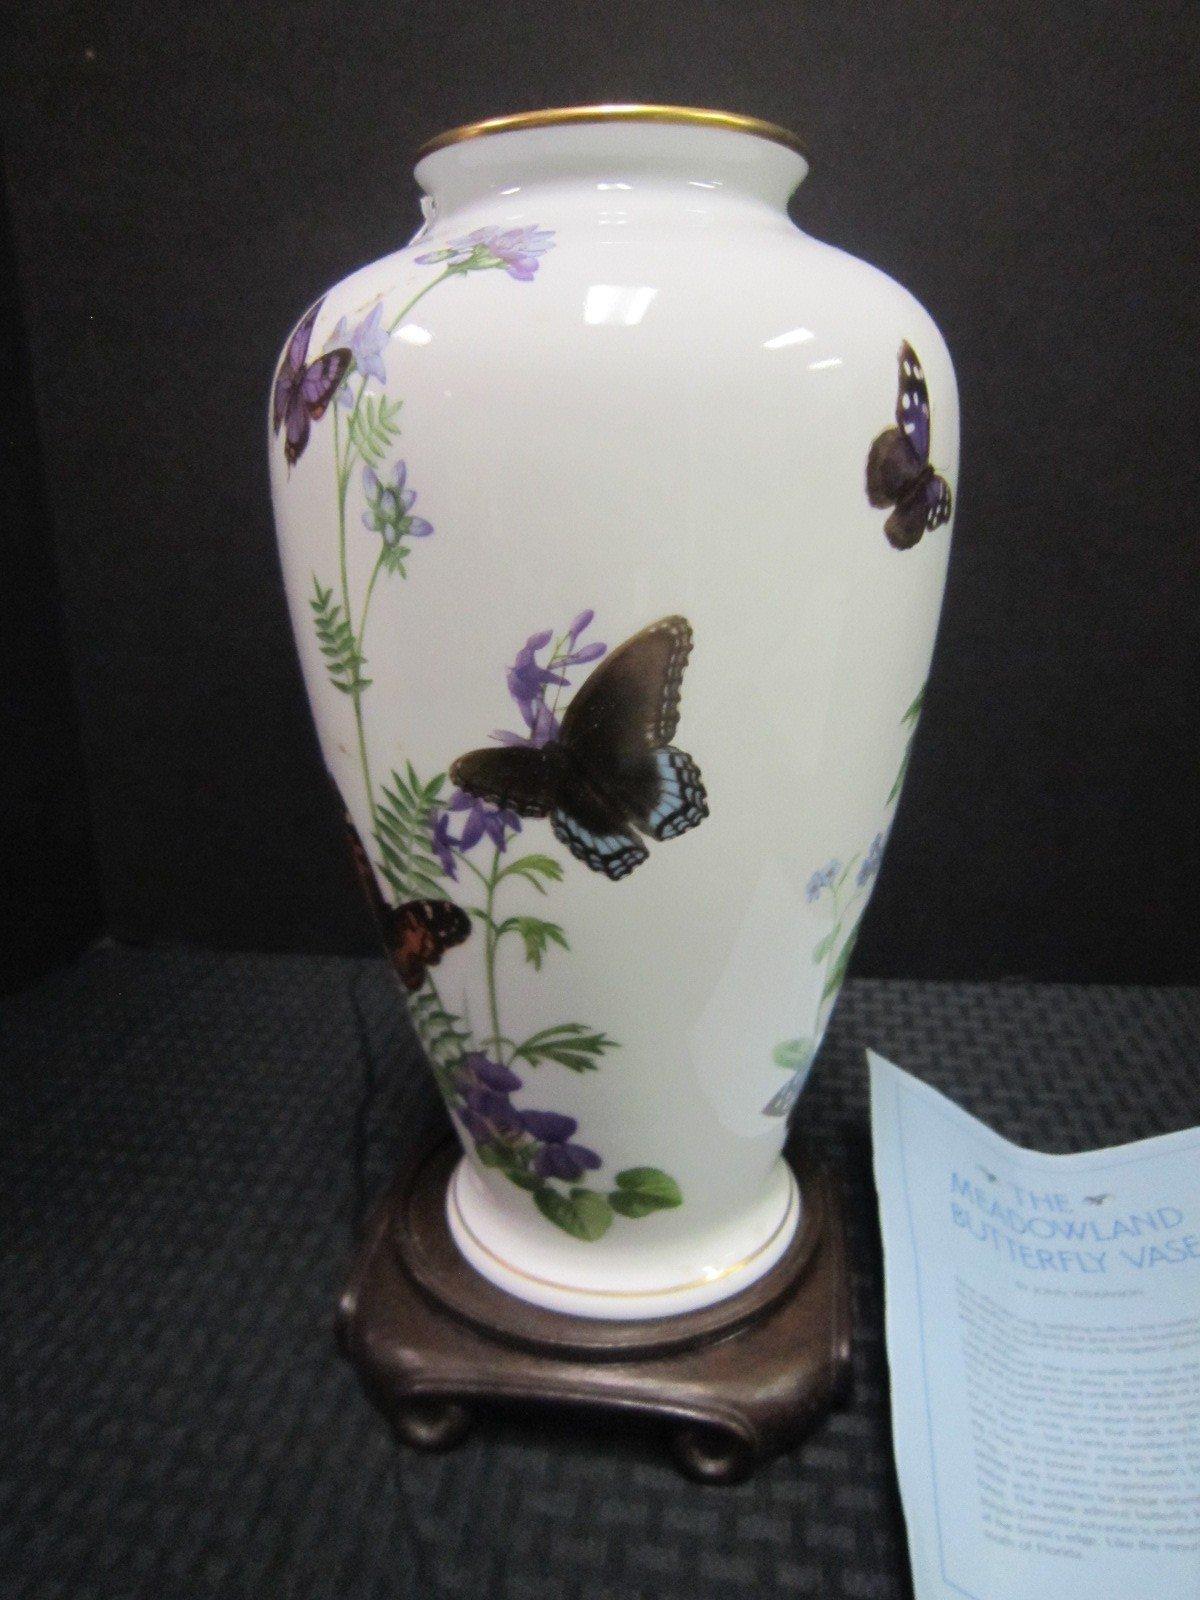 The Meadowland Butterfly Vase by John Wilkinson Limited Edition, Fine Porcelain by Japan